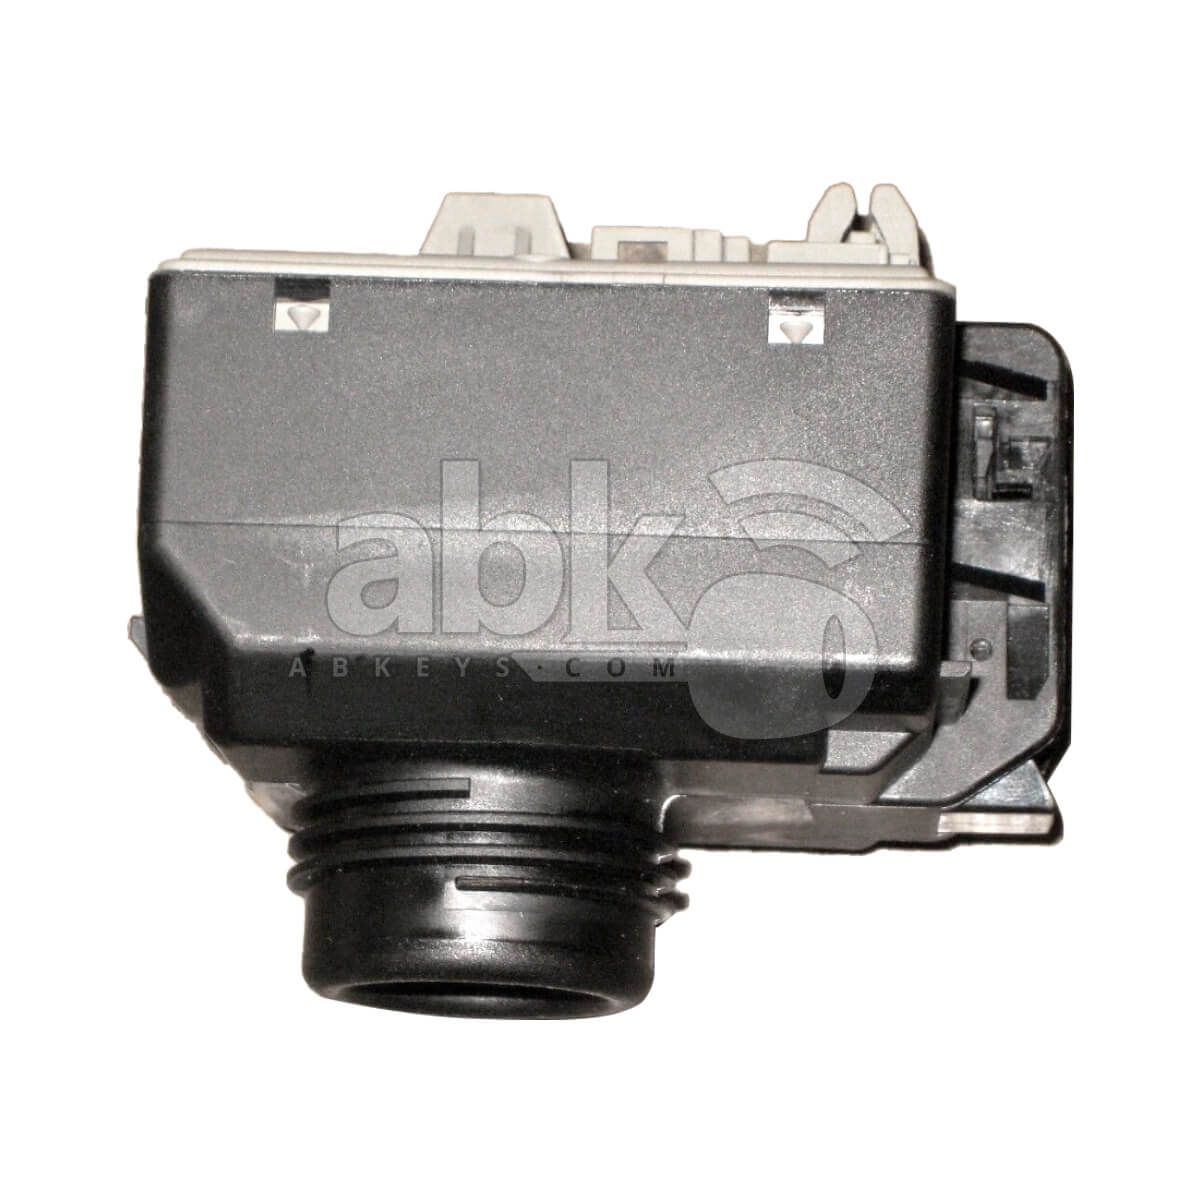 Genuine Mercedes CLS-Class W218 EZS FBS4 Ignition Switch Module 218 905 35 01 2189053501 -